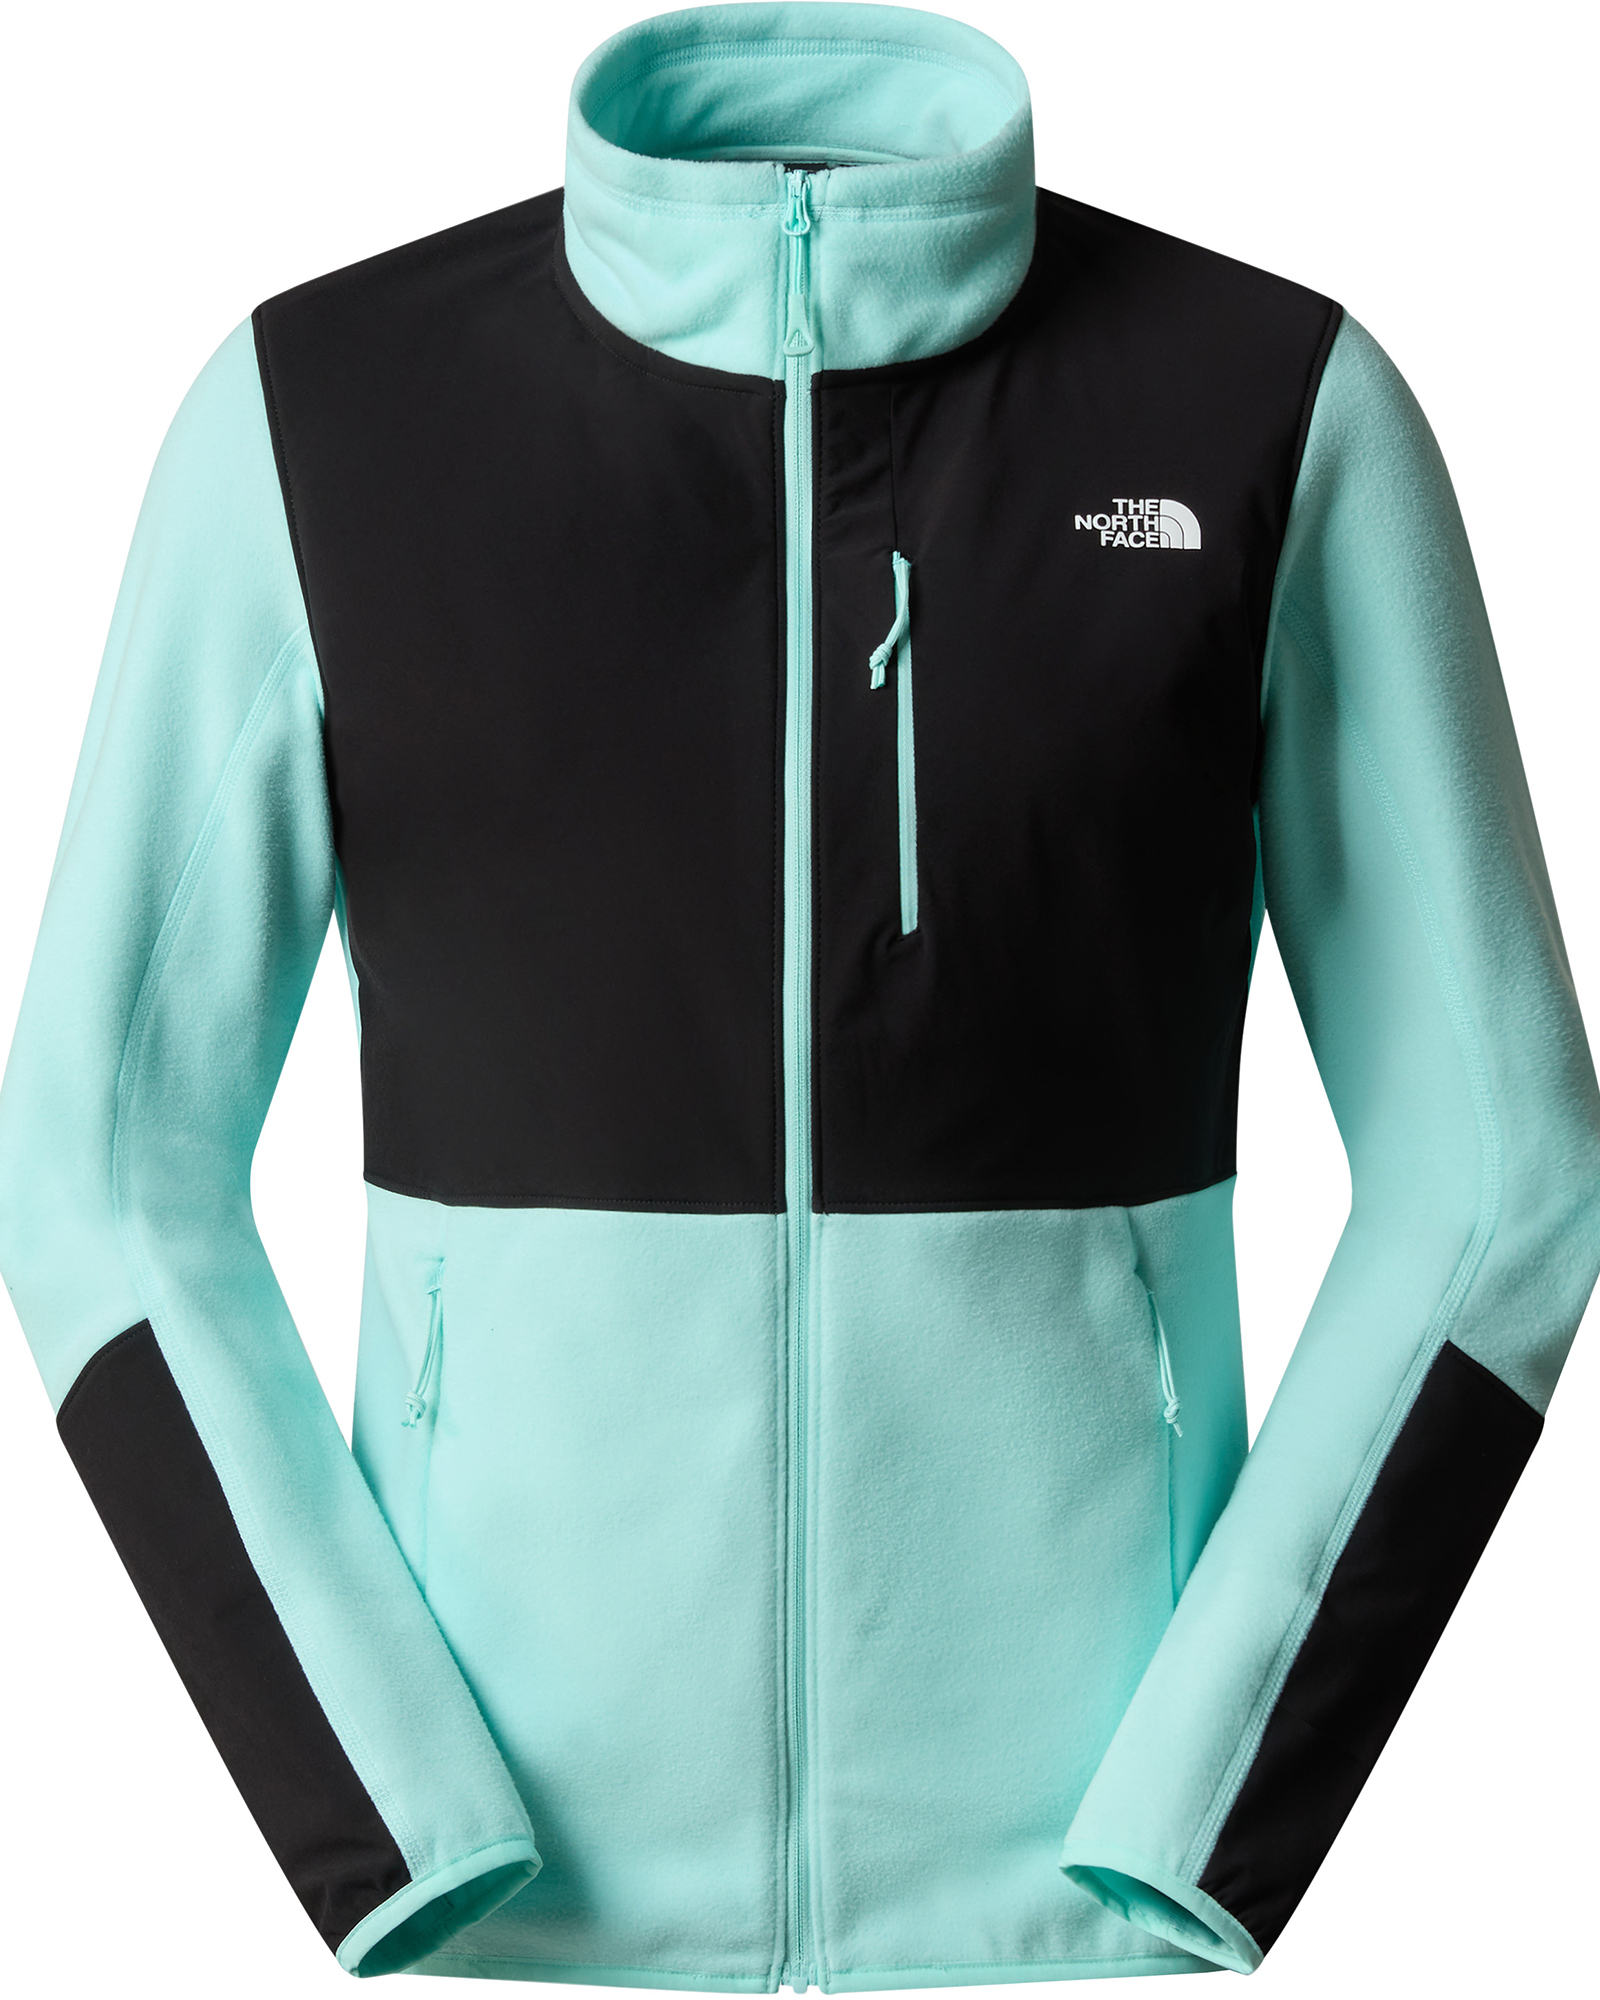 The North Face Diablo Women’s Mid Layer Jacket - Powder Teal-TNF Black XS